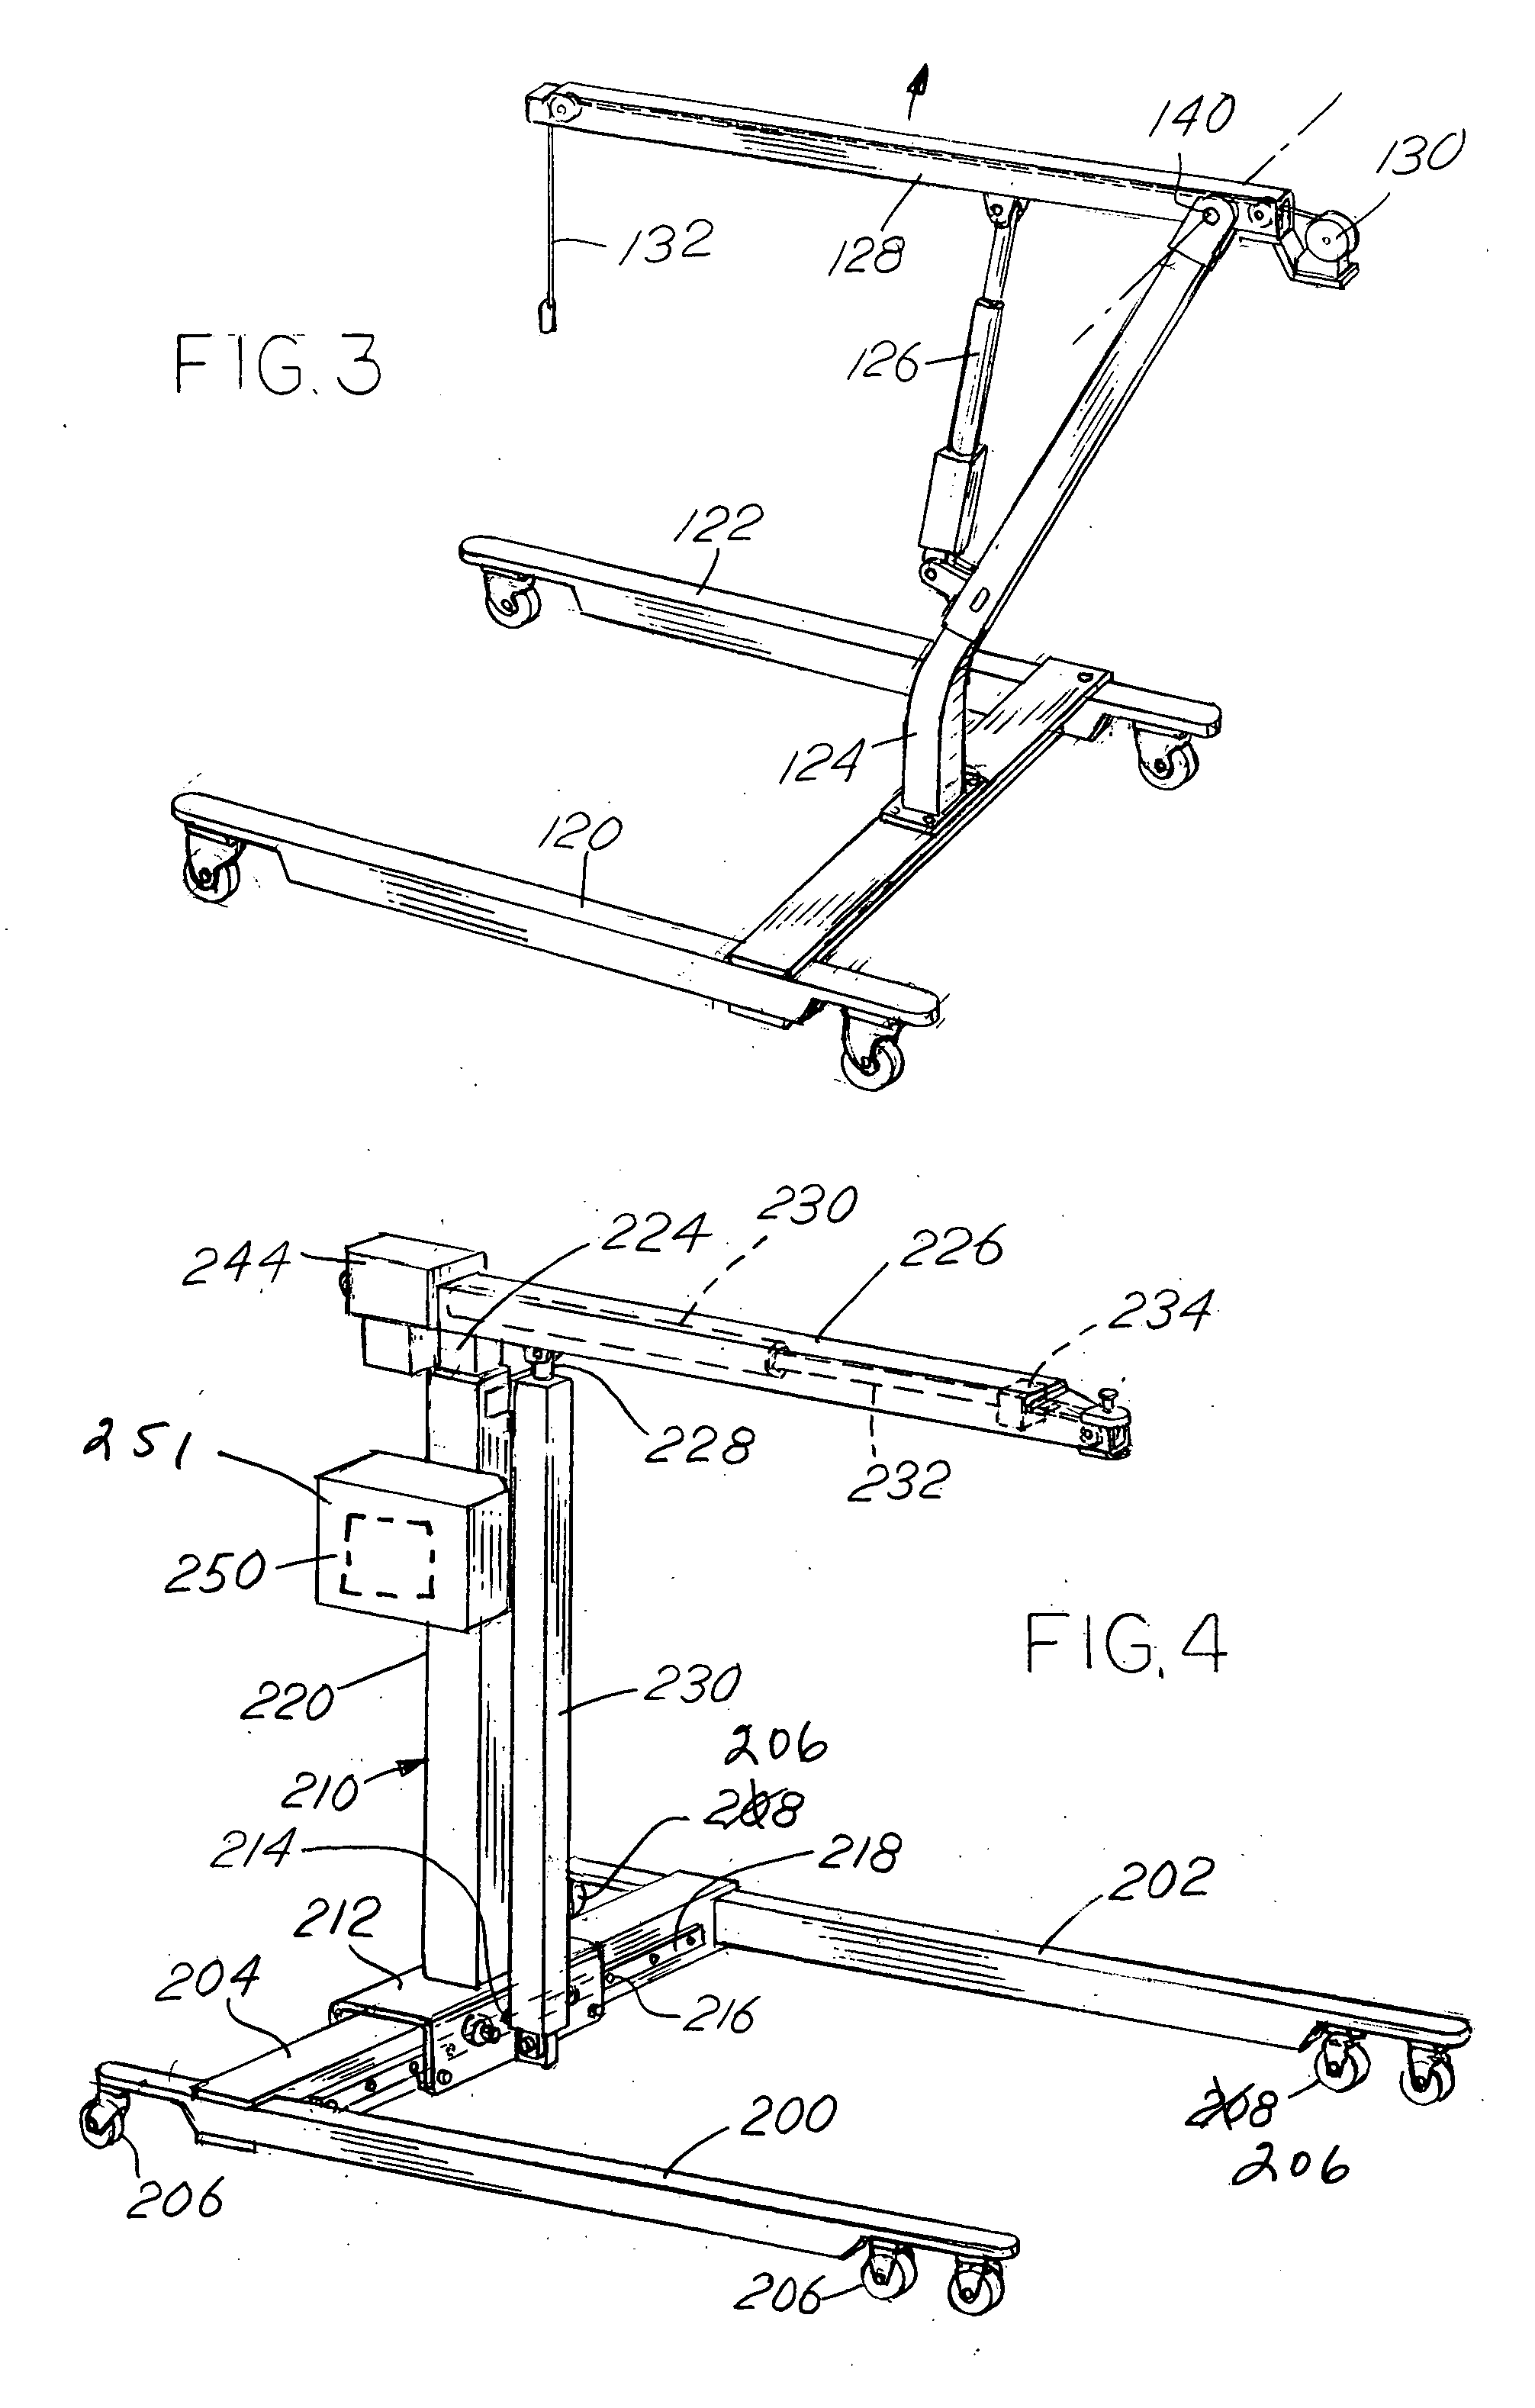 Support and transfer apparatus for transport of an incapacitated individual